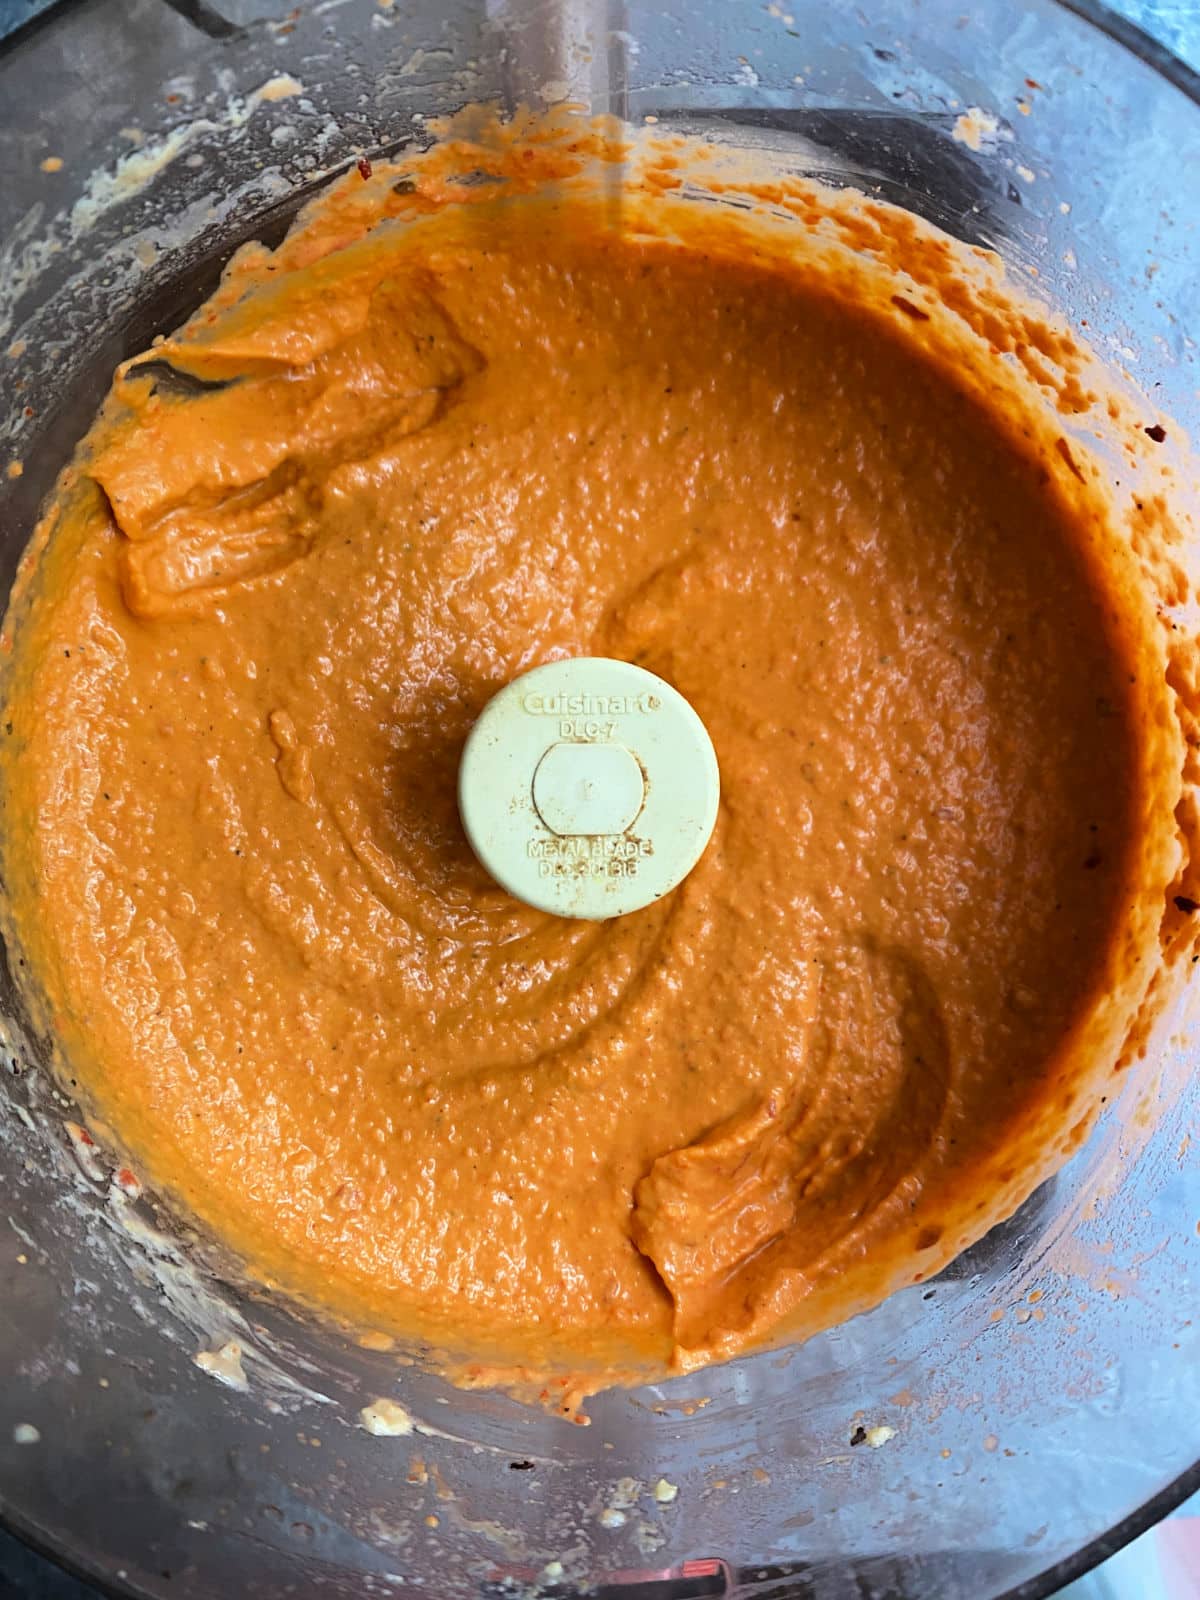 Roasted red pepper hummus in a food processor
